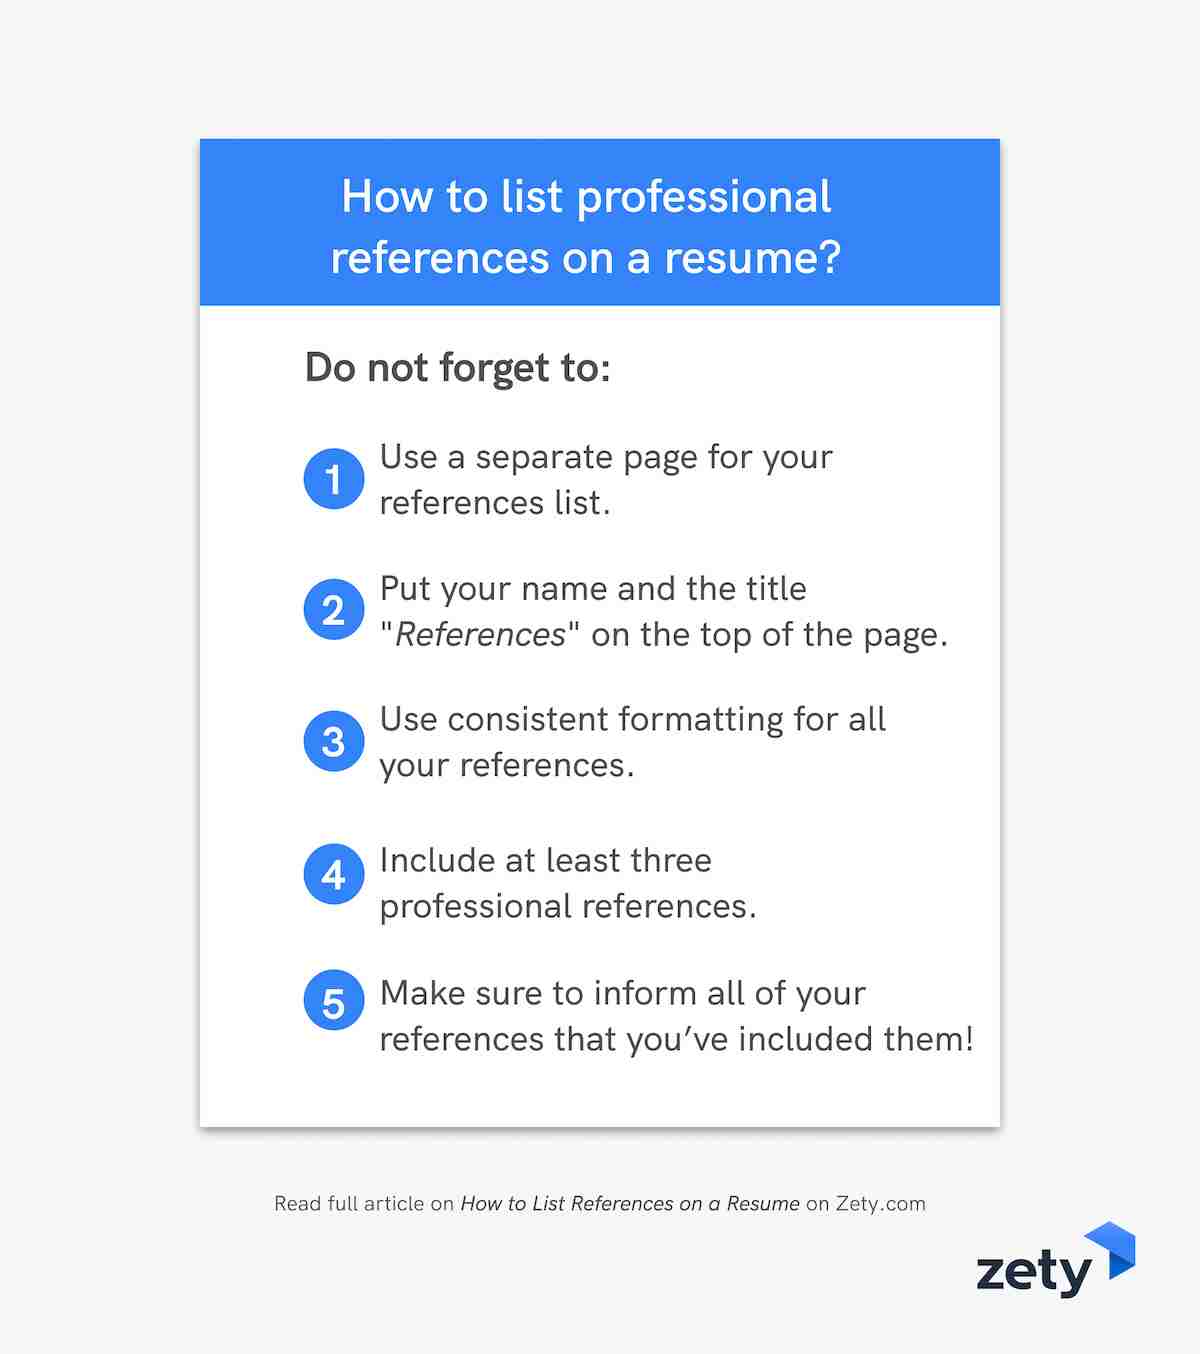 How to list professional references on a resume